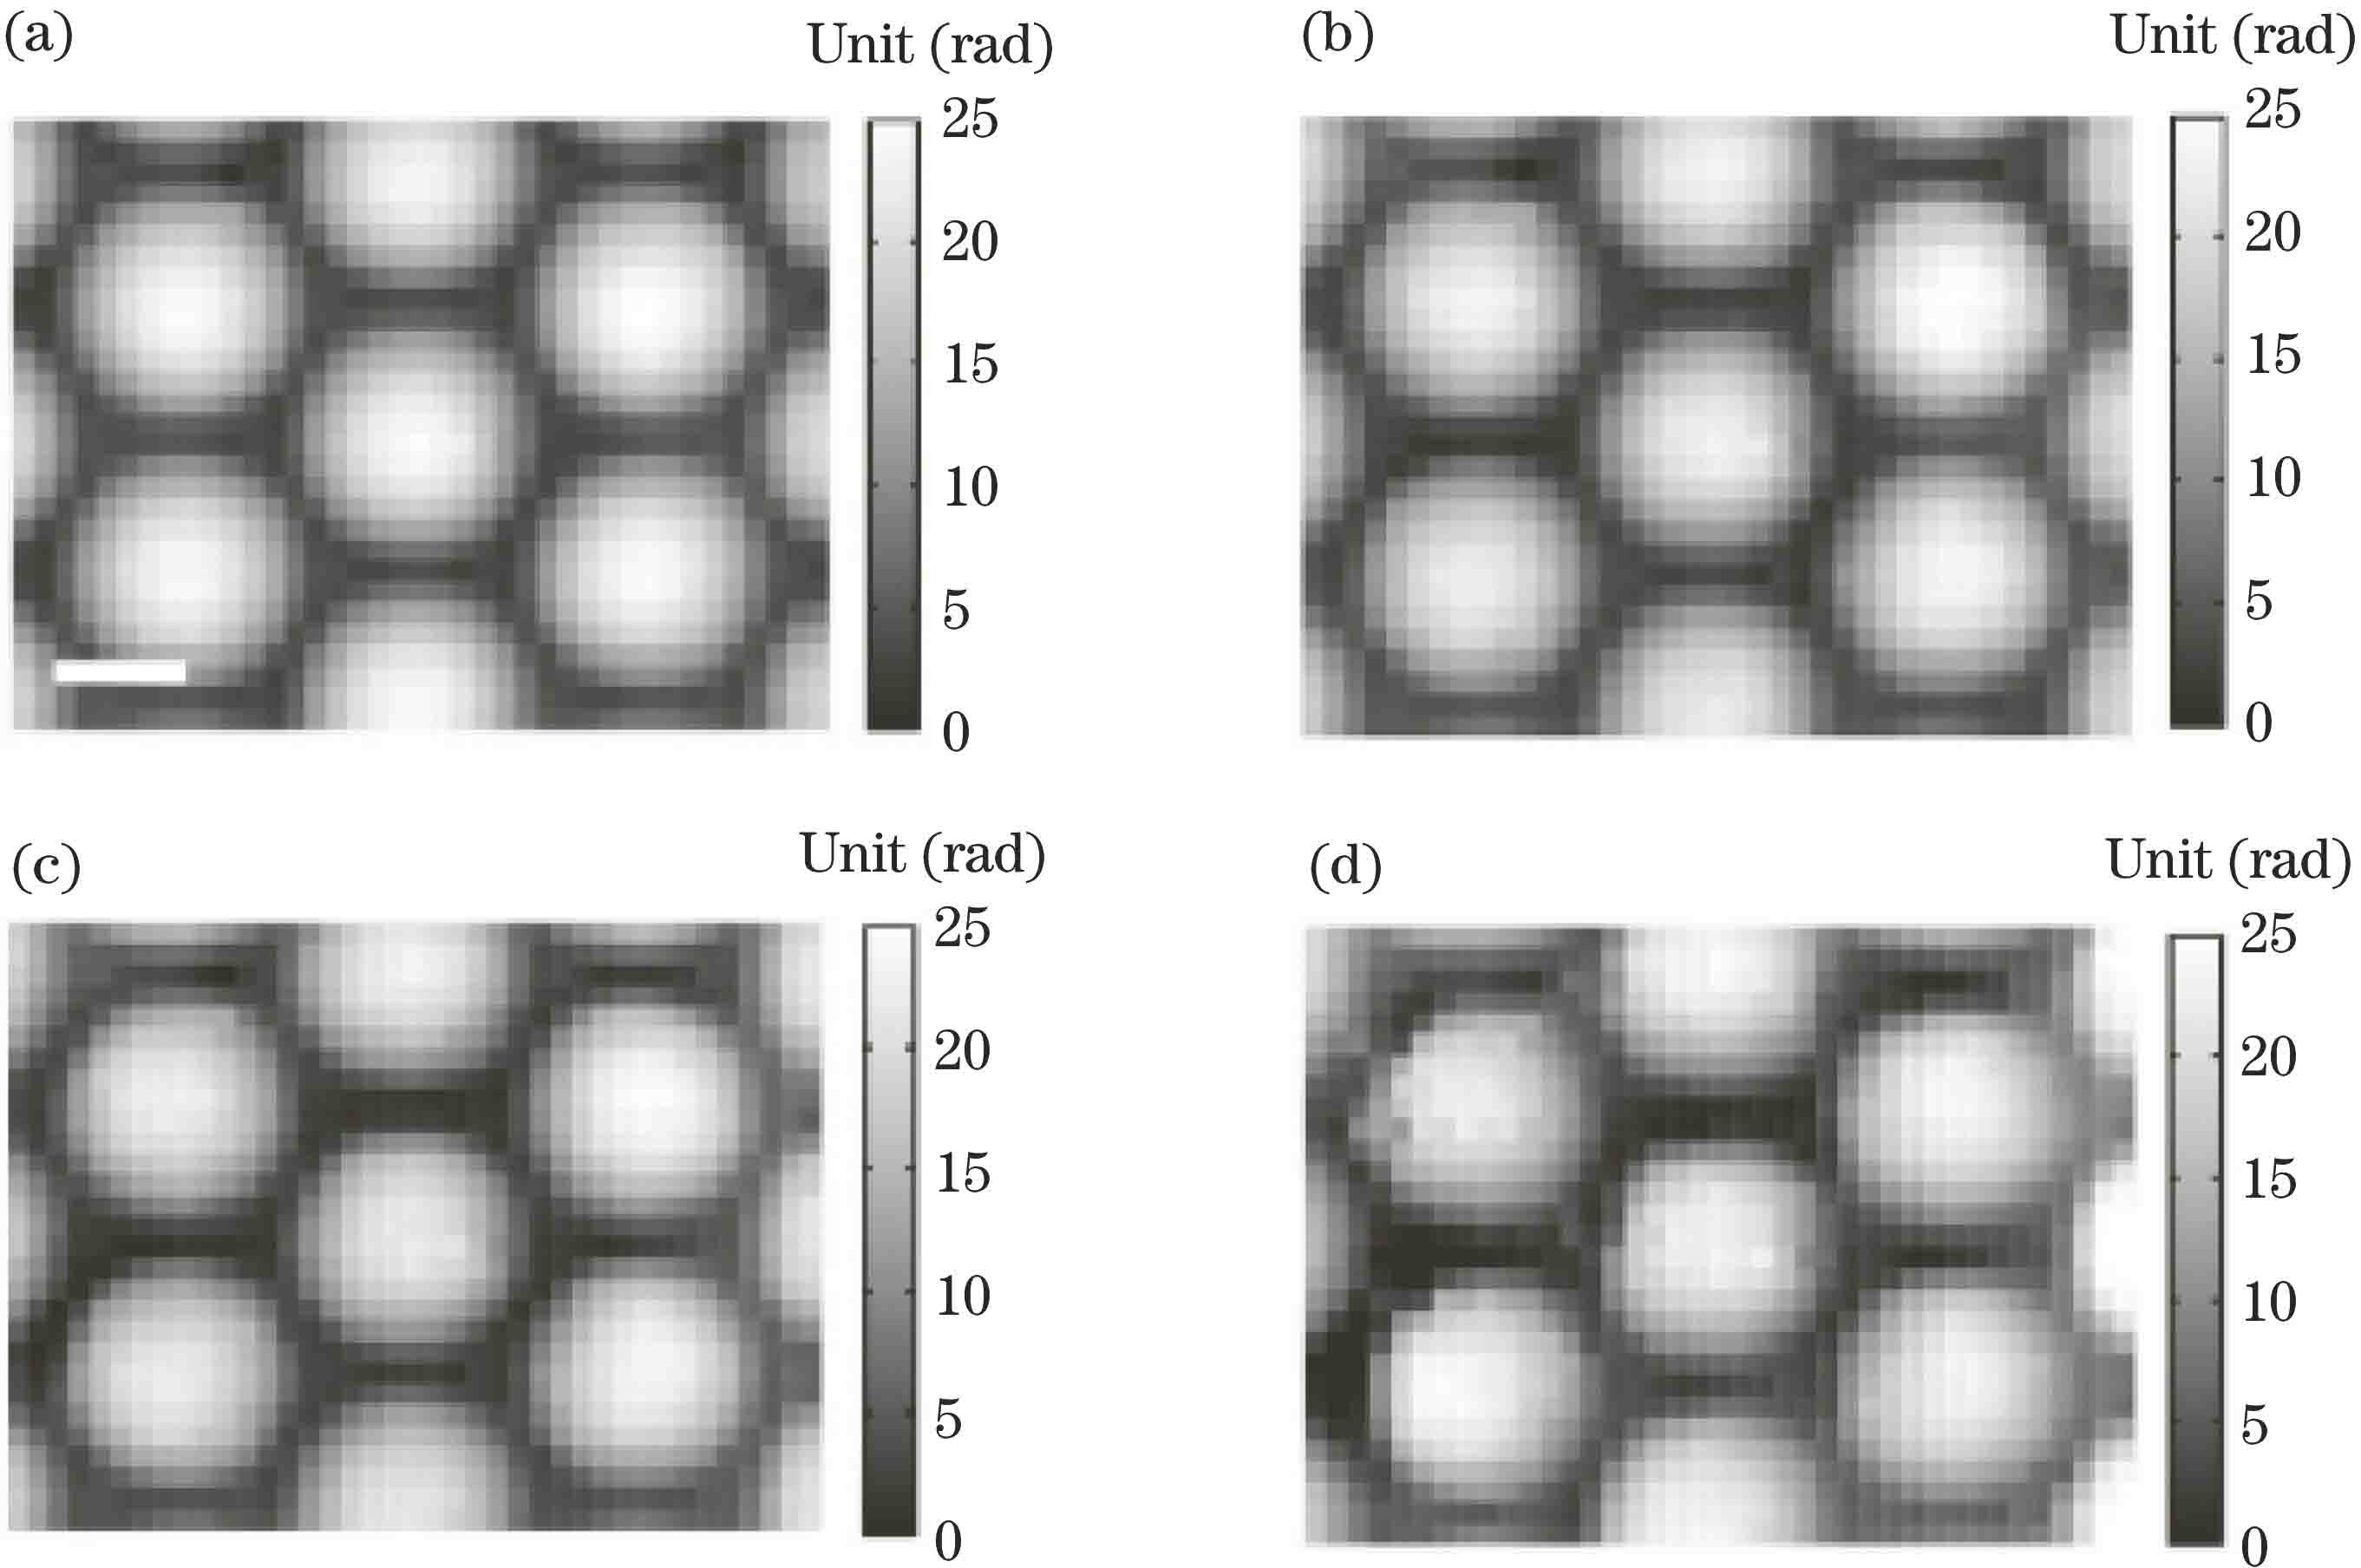 Reconstructed phases with transport of intensity equation method under illumination with different degrees of coherence (the larger the numerical aperture, the lower the spatial coherence of the illumination)[26]. (a) NA=0.05; (b) NA=0.15; (c) NA=0.2; (d) NA=0.25